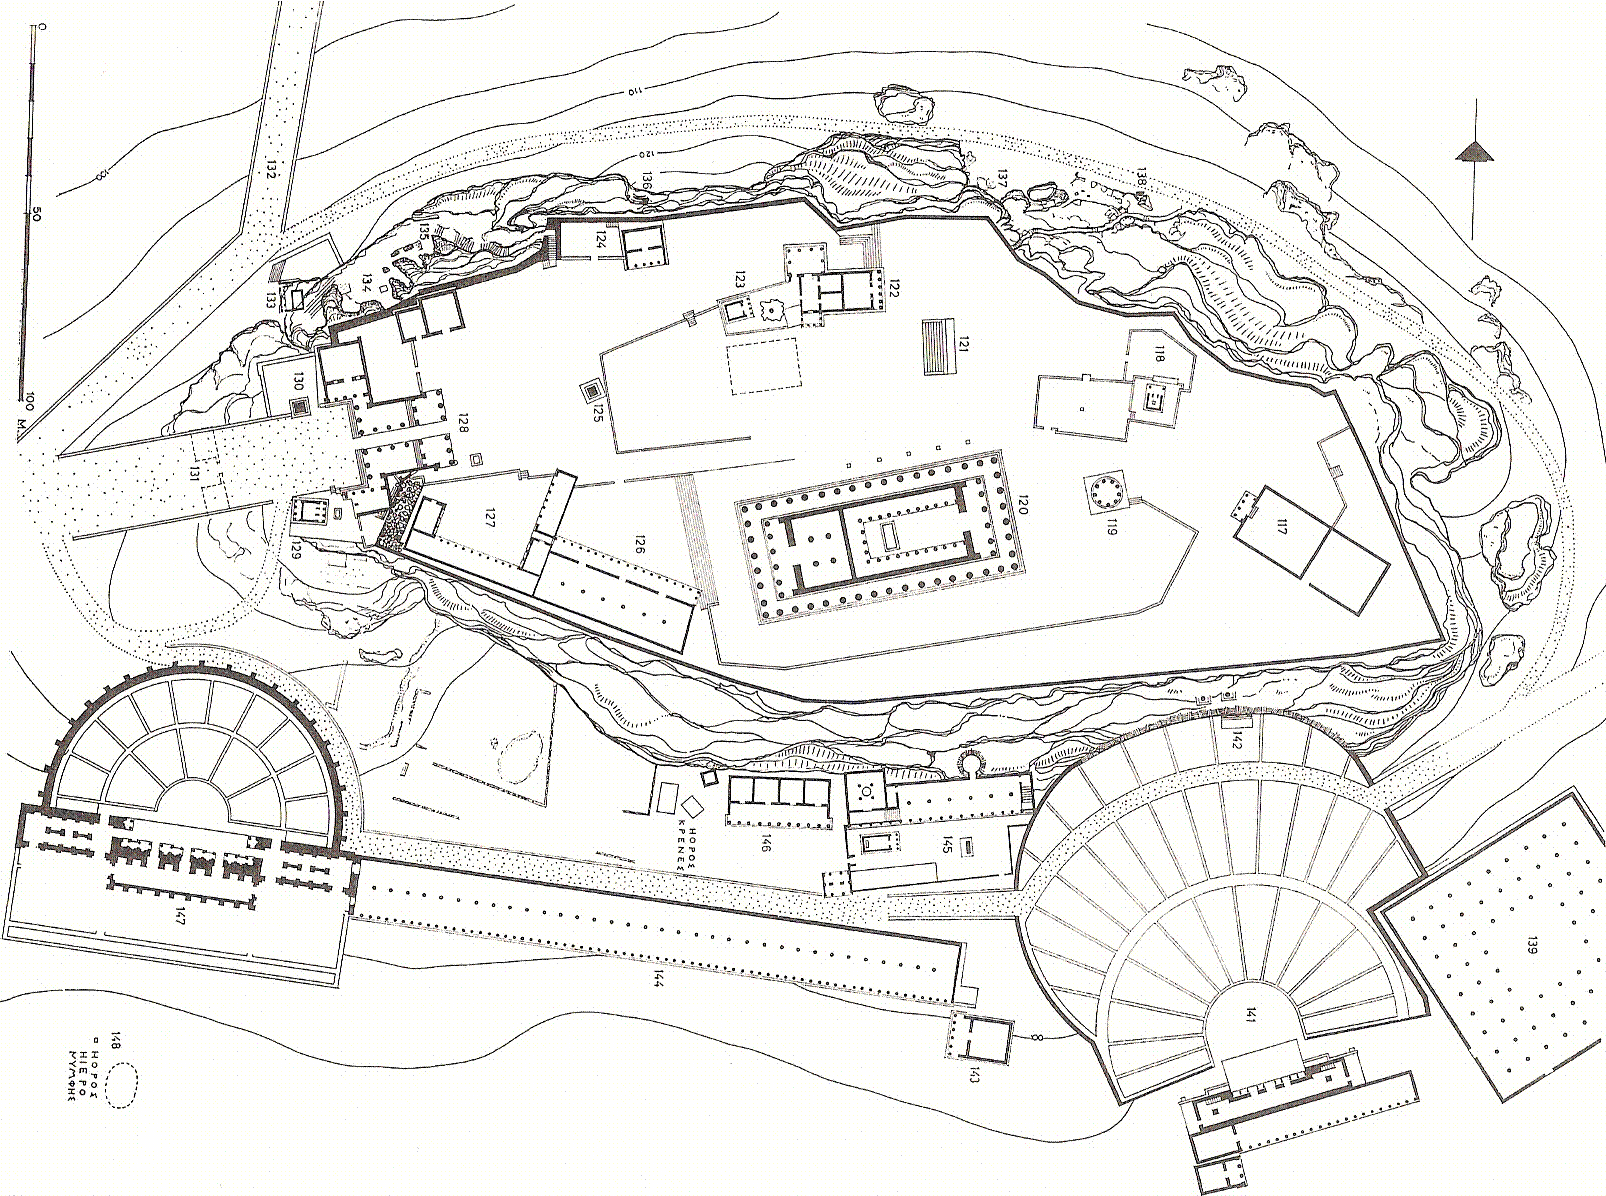 Plan of the site